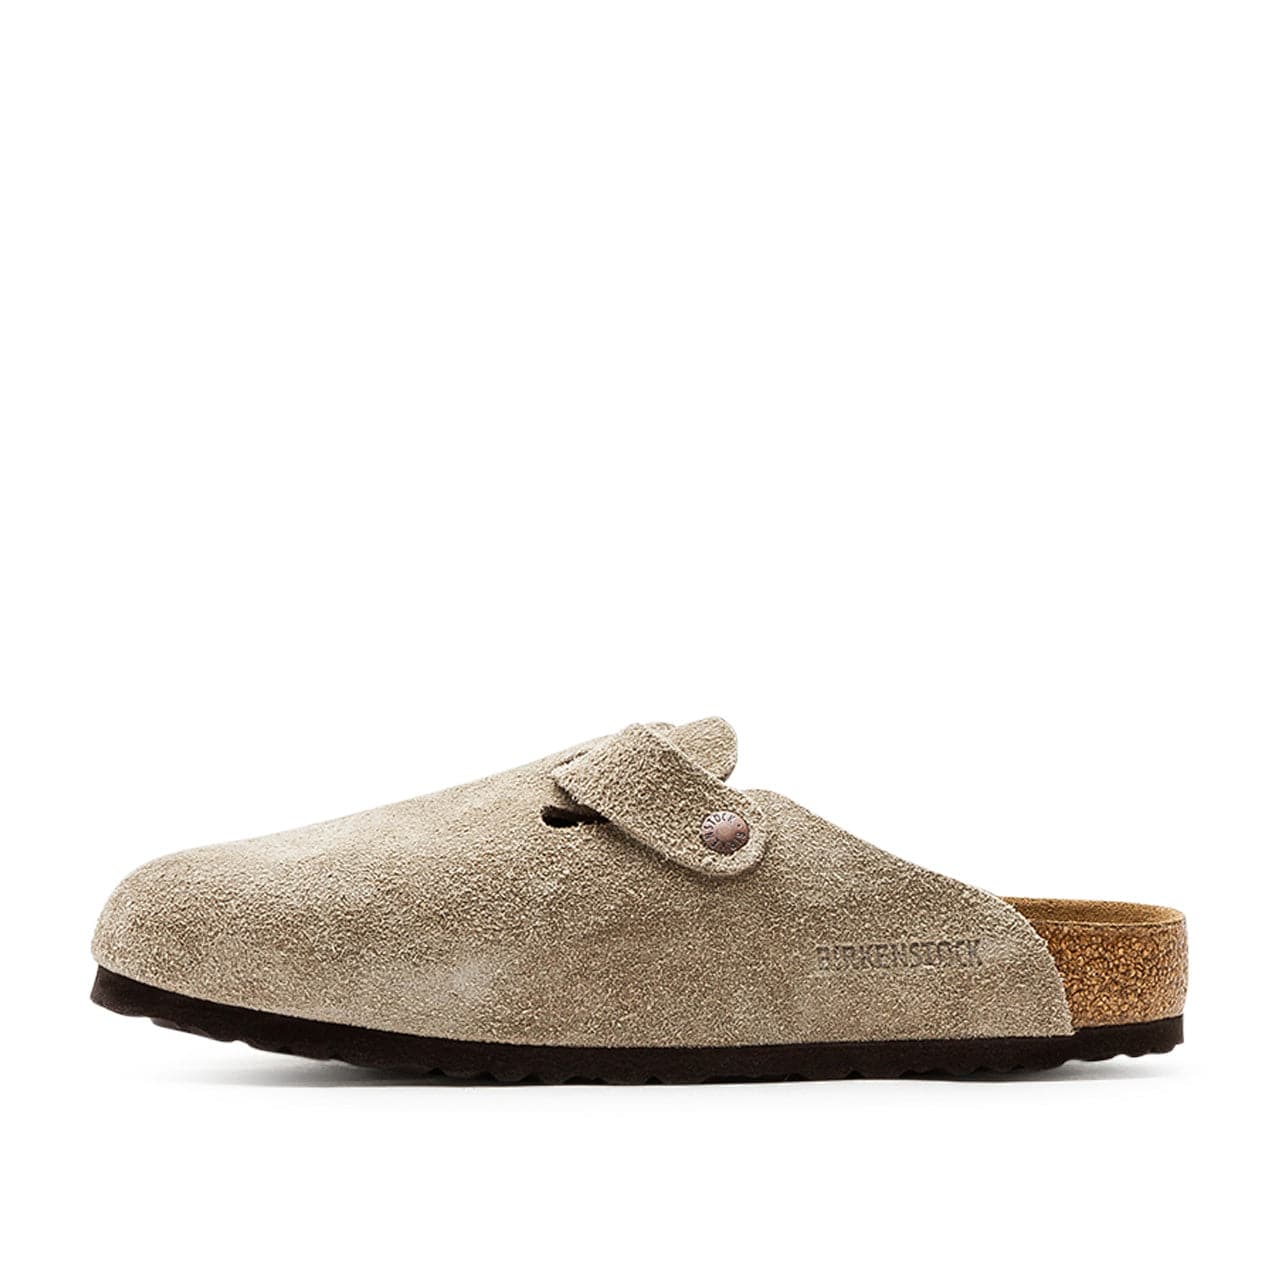 Birkenstock Boston Soft Footbed Suede Leather (Taupe)  - Cheap Juzsports Jordan Outlet